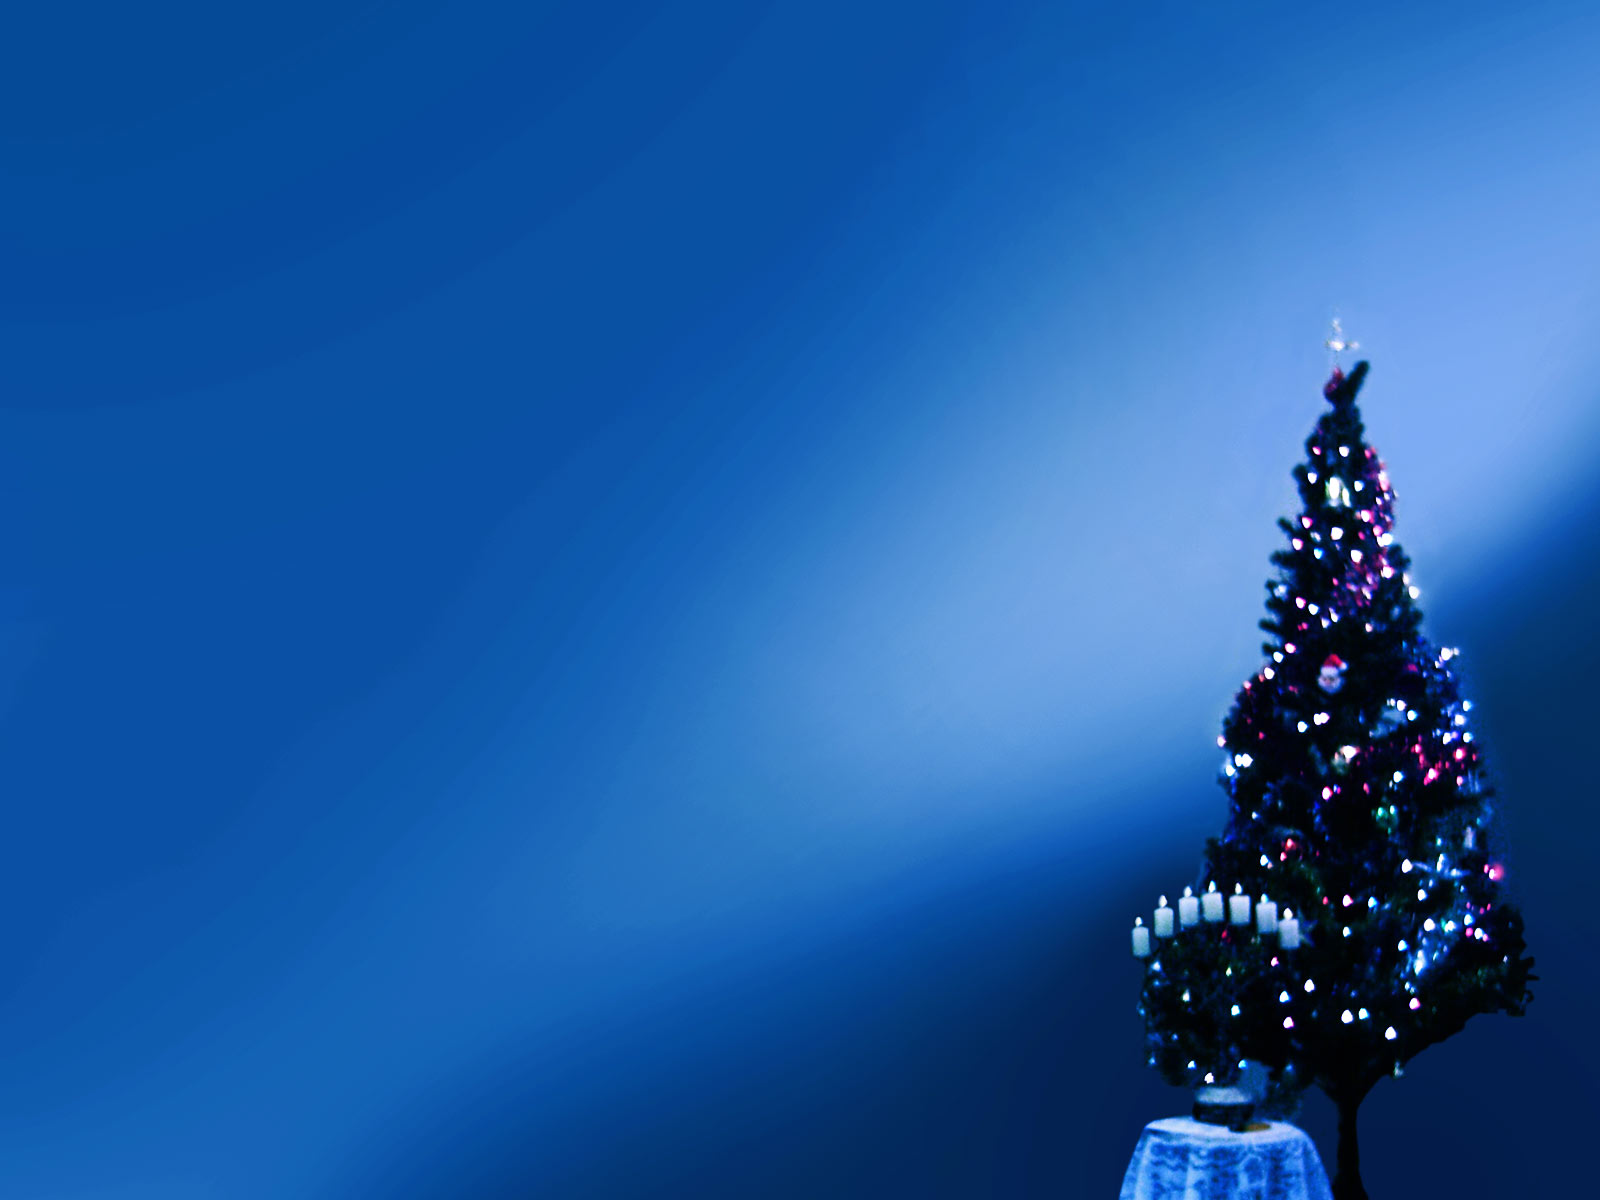 2015 Christmas computer background - wallpapers, images, photos ...